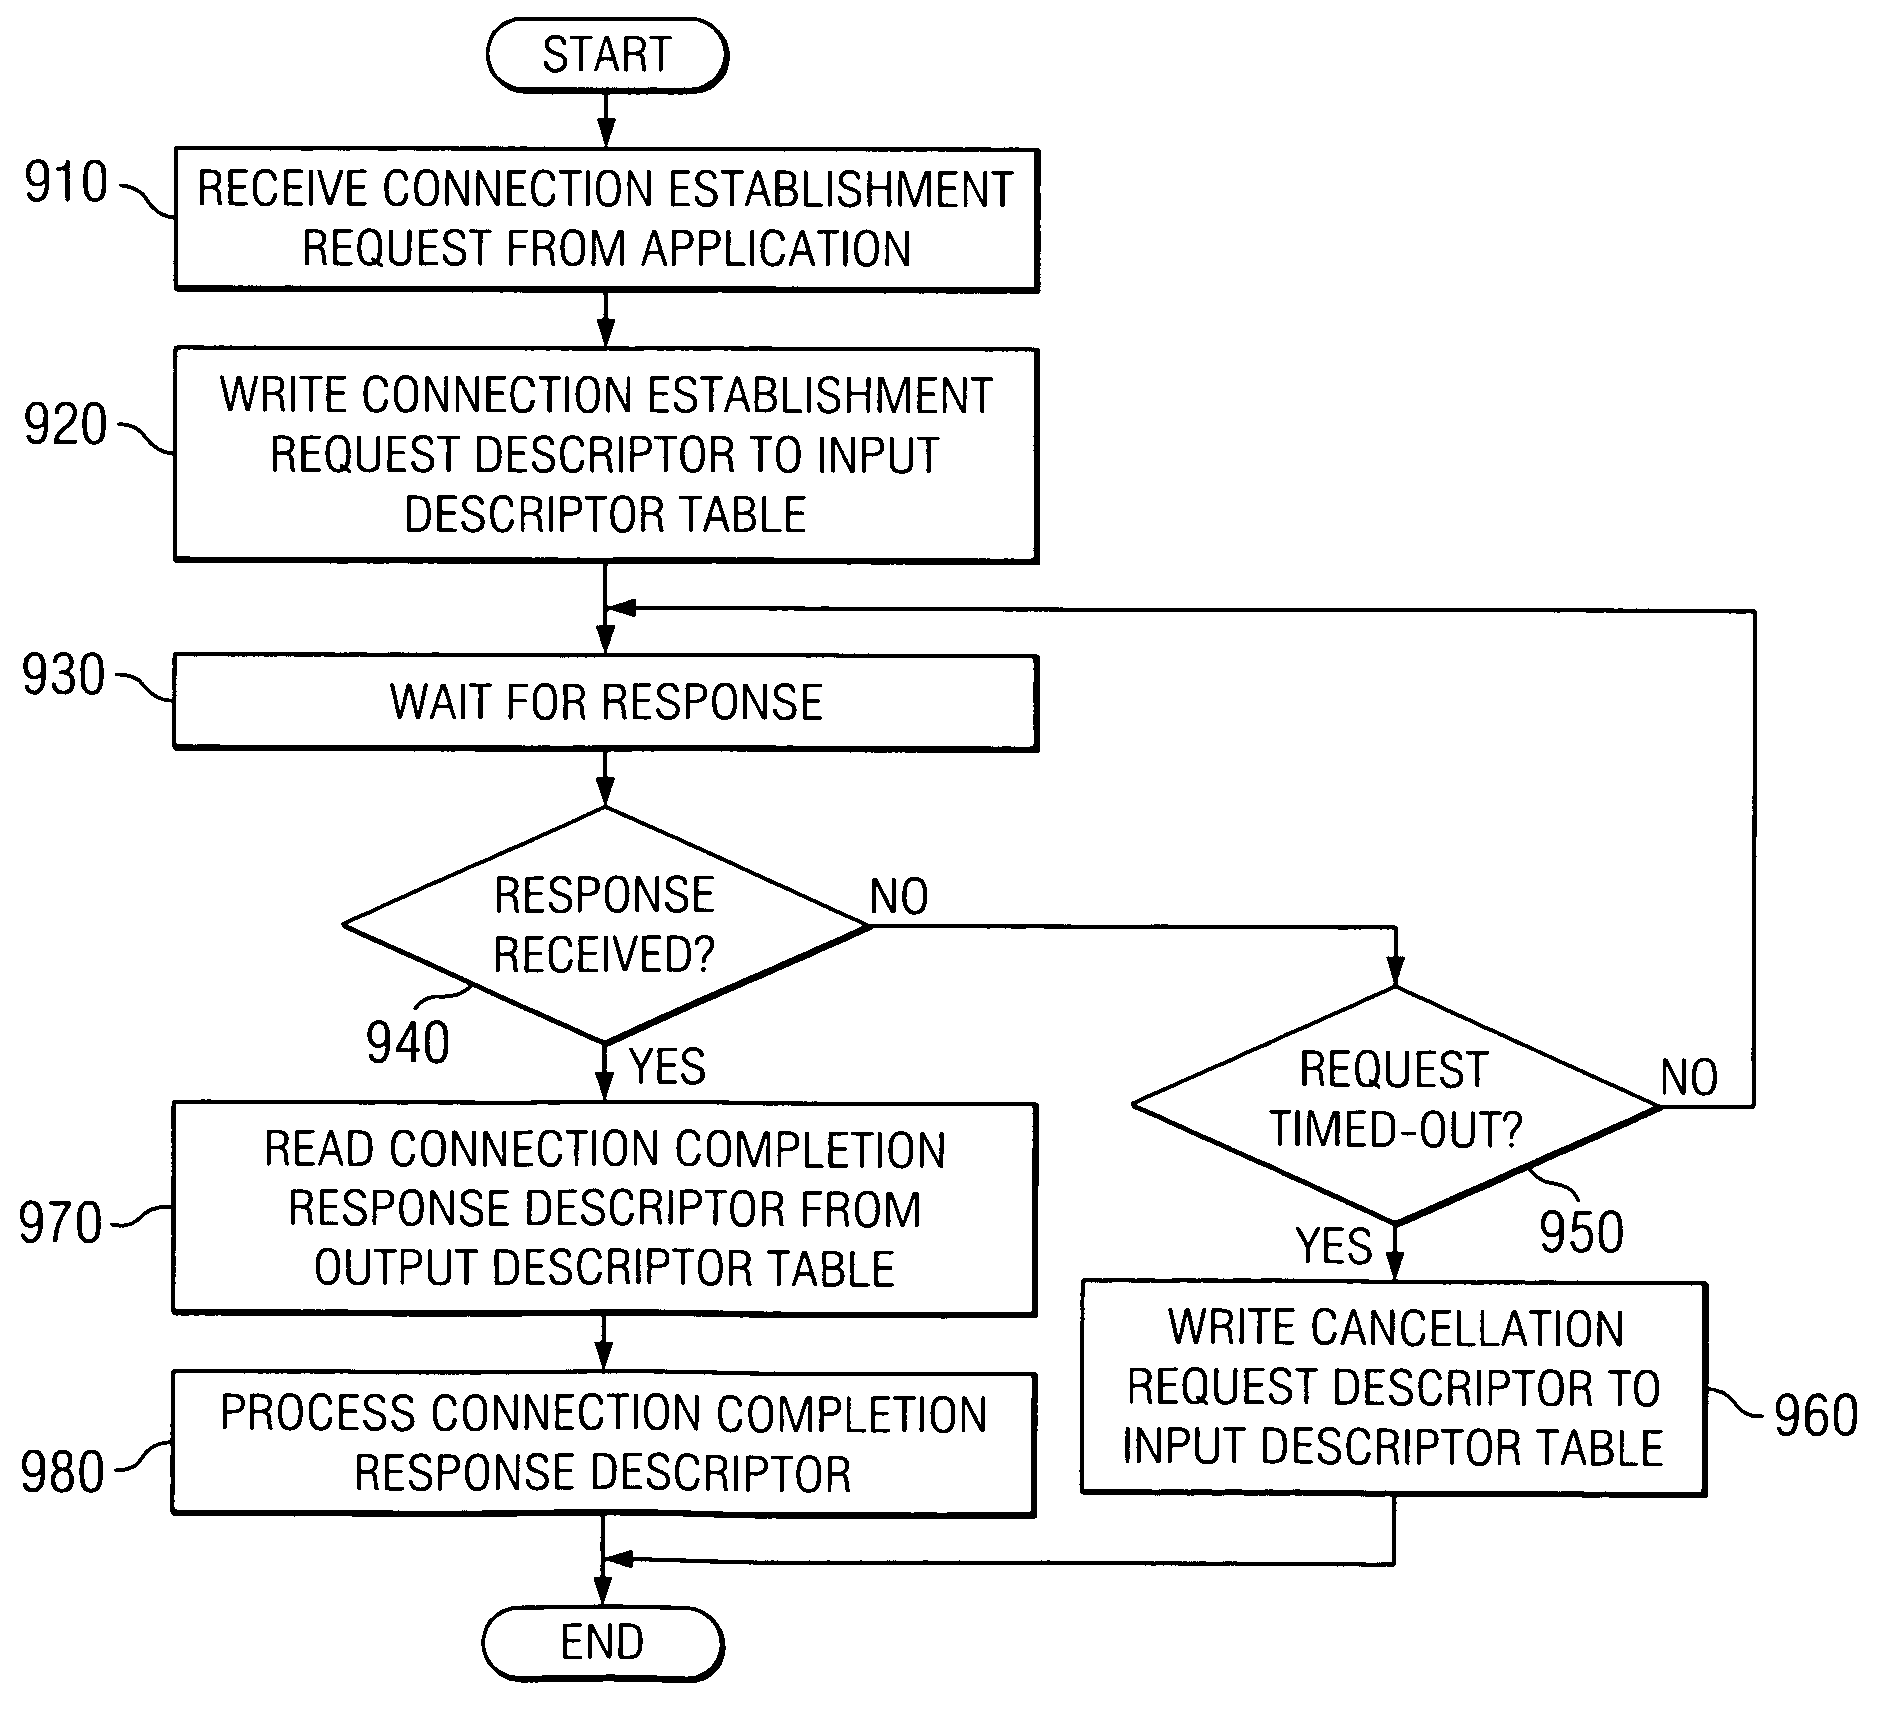 Apparatus and method for supporting memory management in an offload of network protocol processing